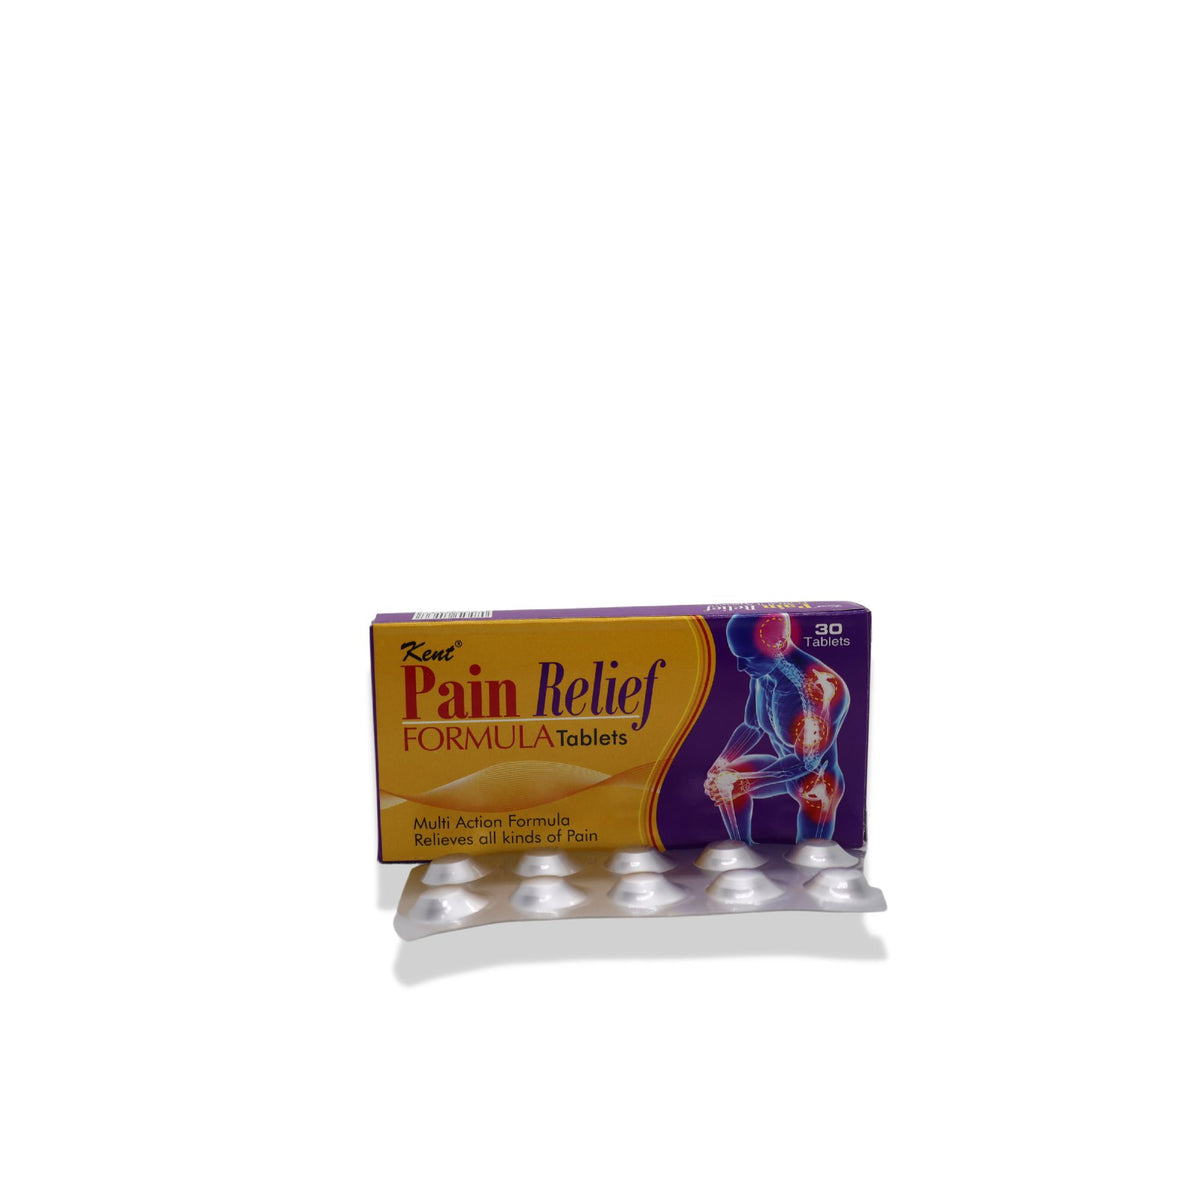 Pain Relief Formula Tablets